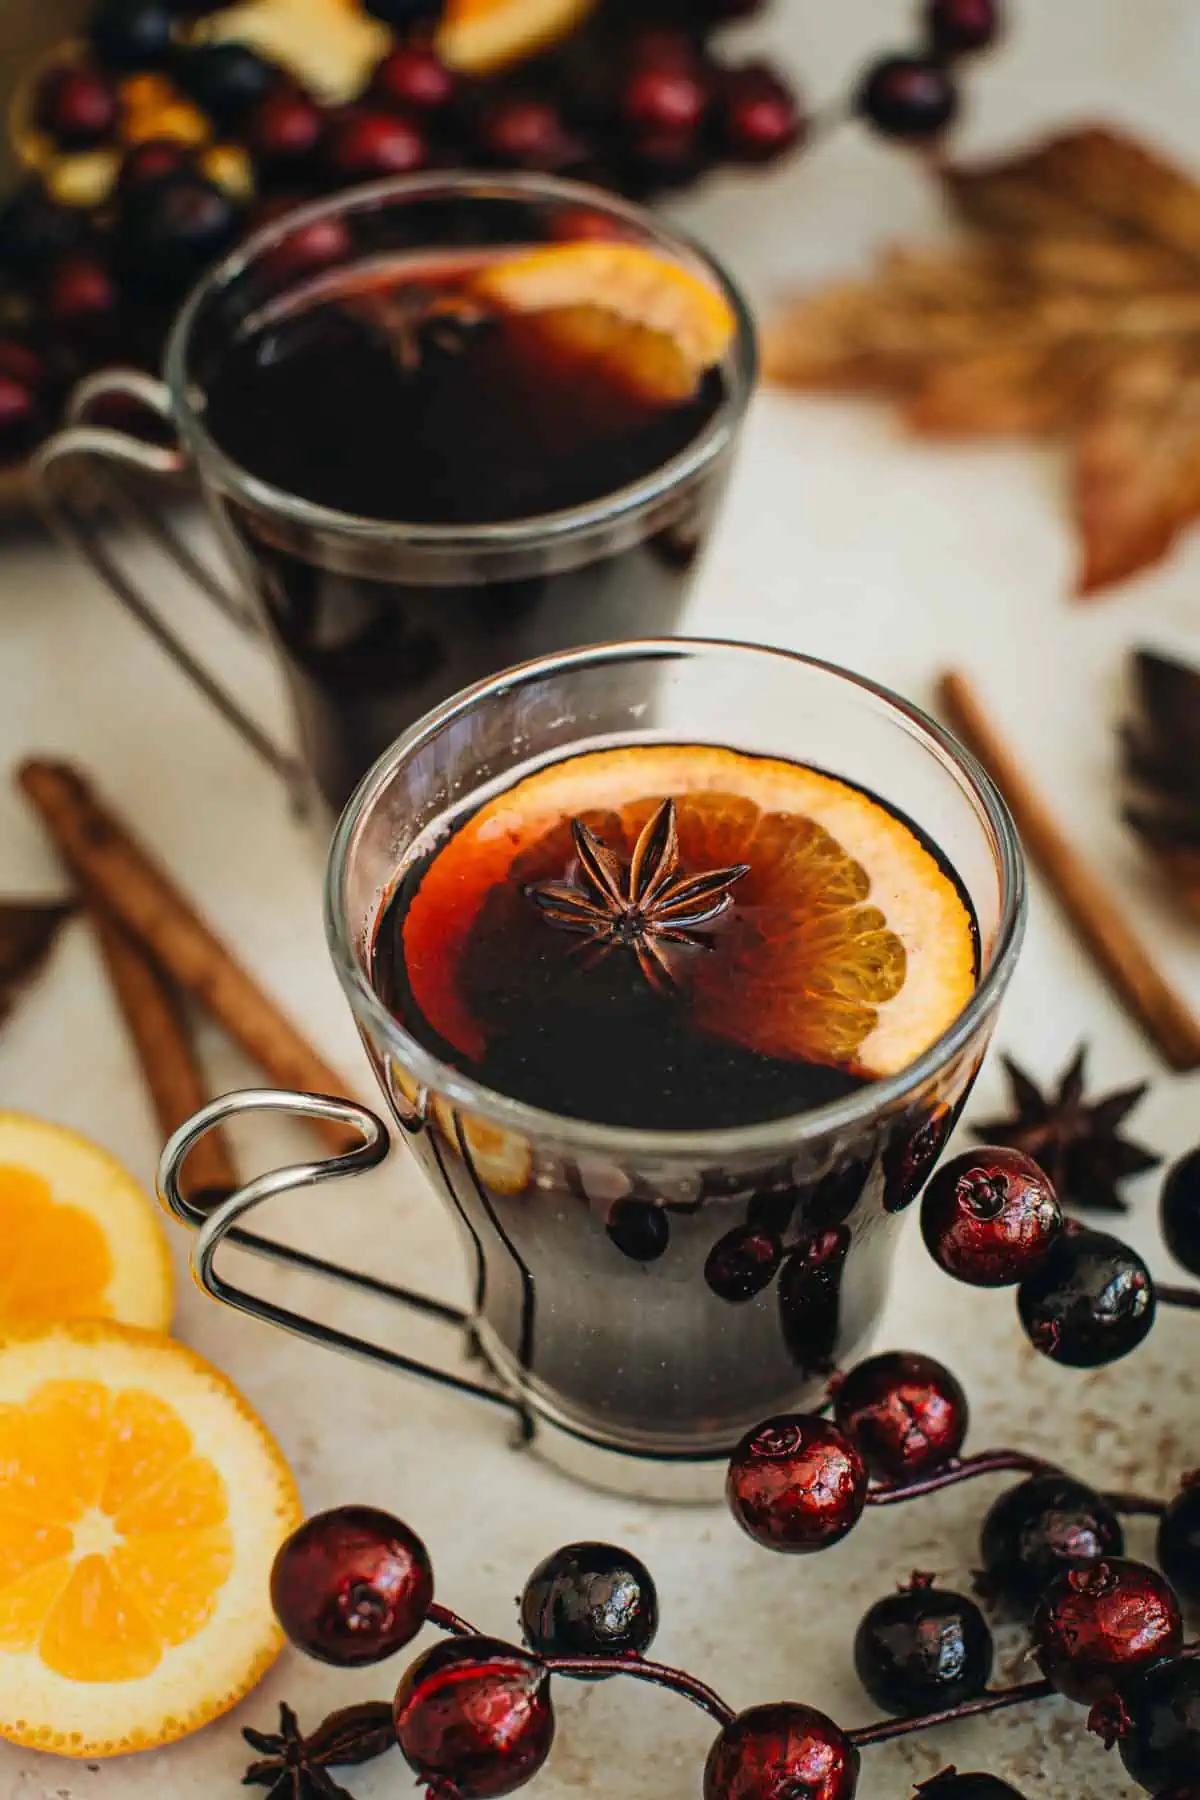 Mulled wine in a glass with an orange slice and star anise for garnish.